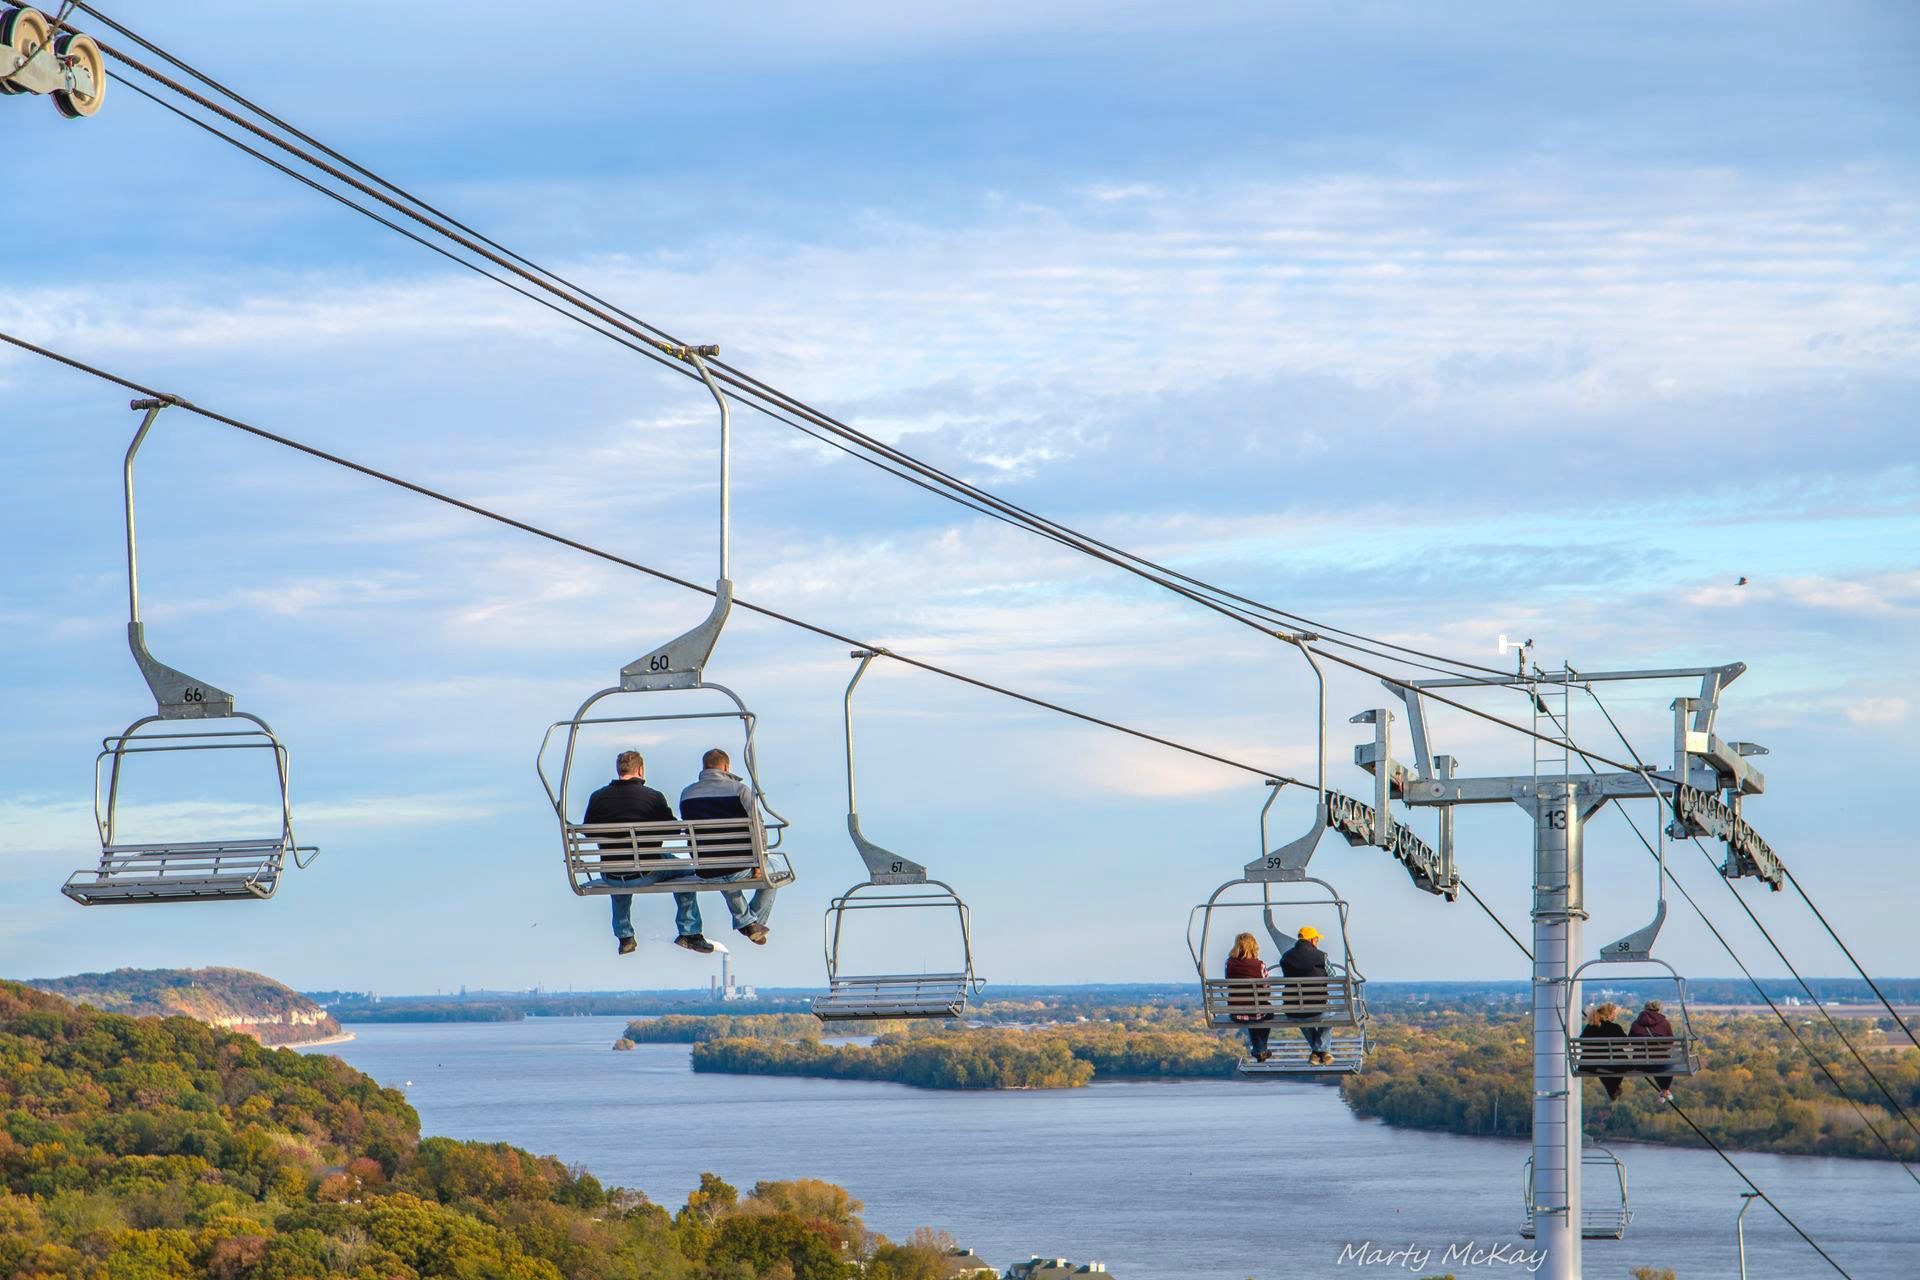 A group of people are riding a ski lift over a body of water.